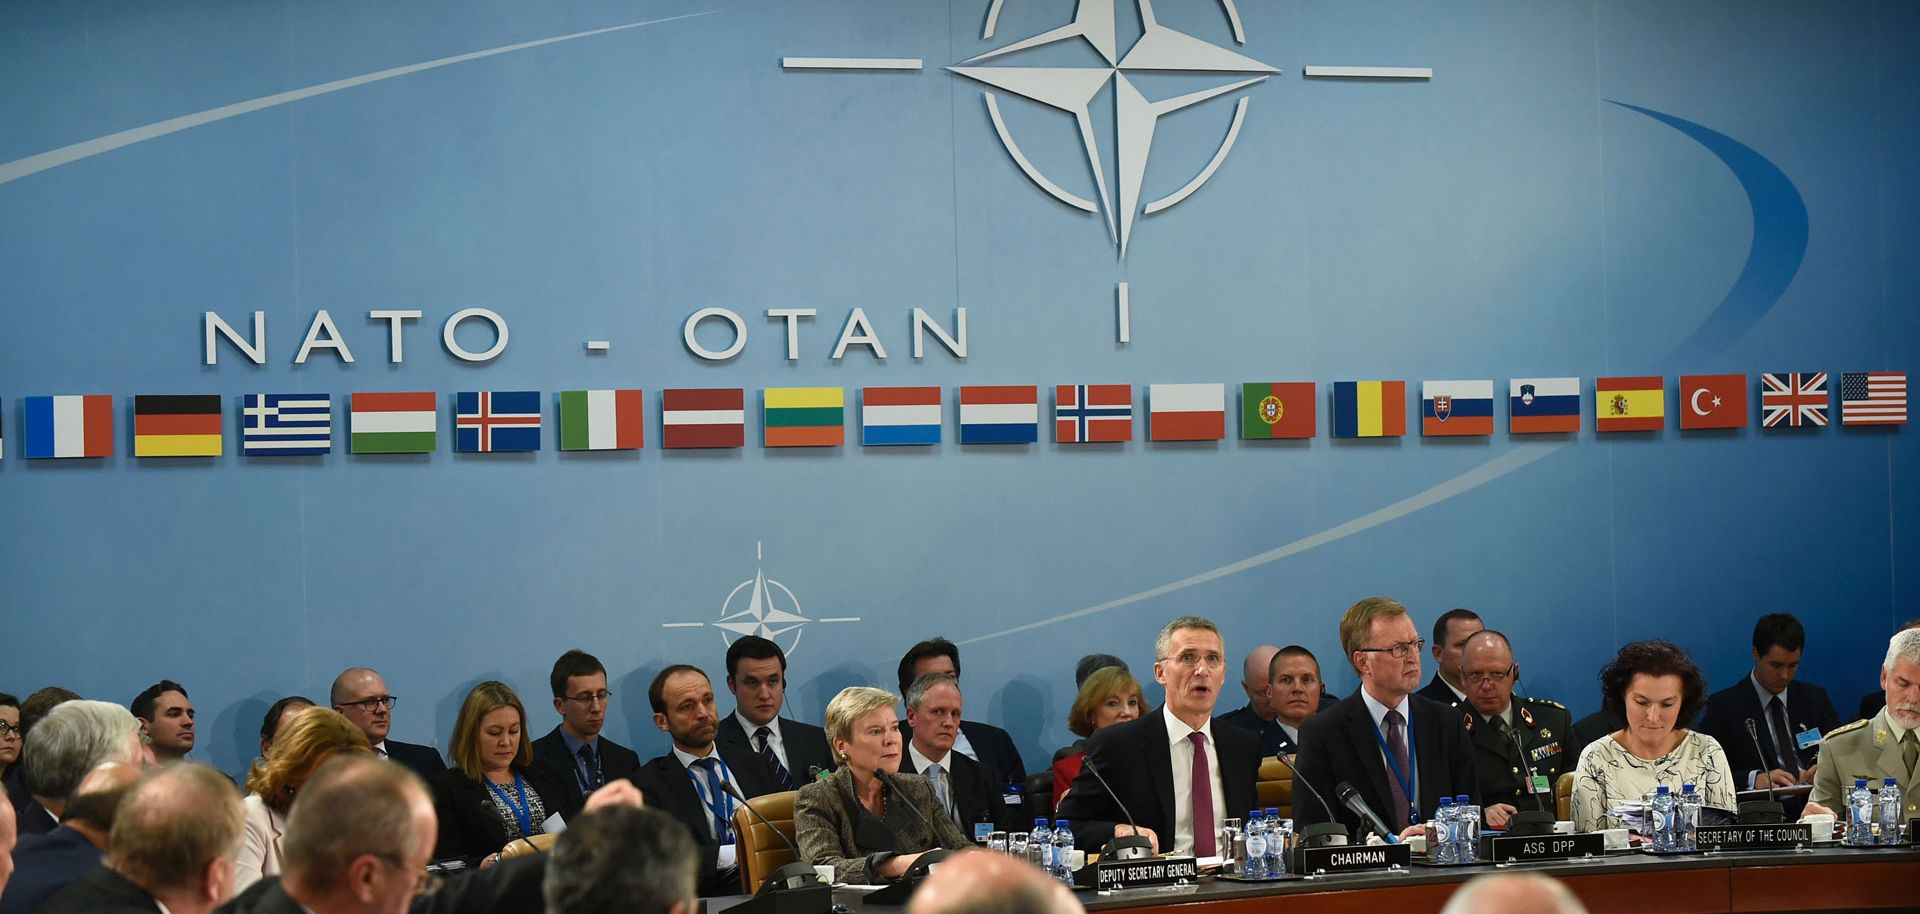 In part 2 of this series on the North Atlantic Treaty Organization, NATO Secretary-General Jens Stoltenberg speaks at a NATO Defense ministers' meeting at the NATO headquarters in Brussels on October 26, 2016. 